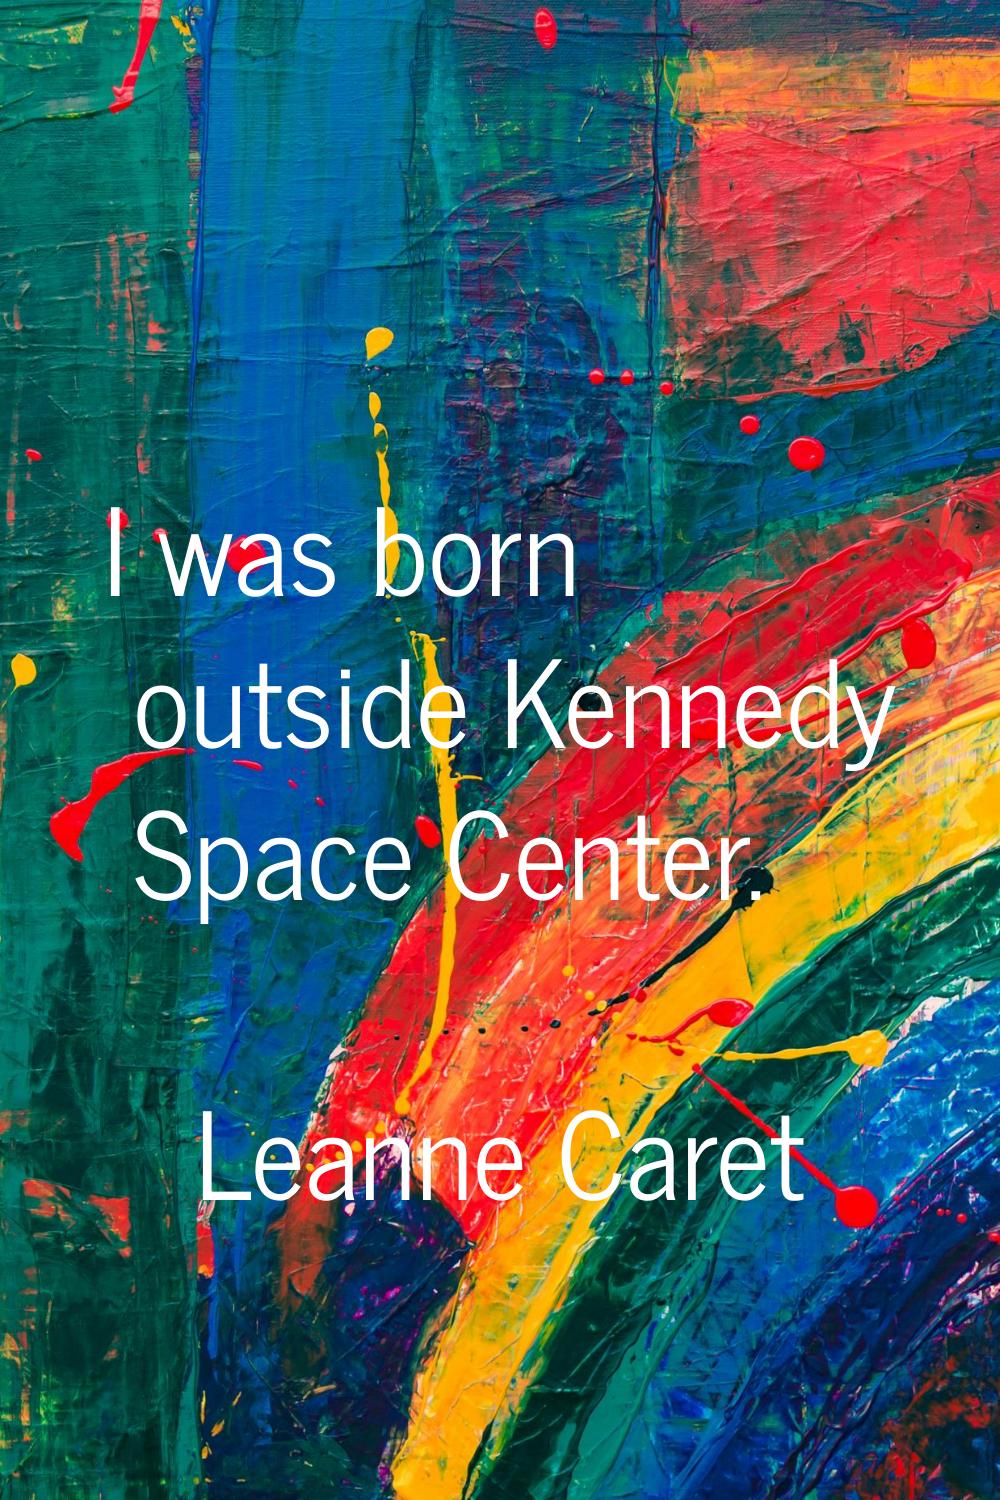 I was born outside Kennedy Space Center.